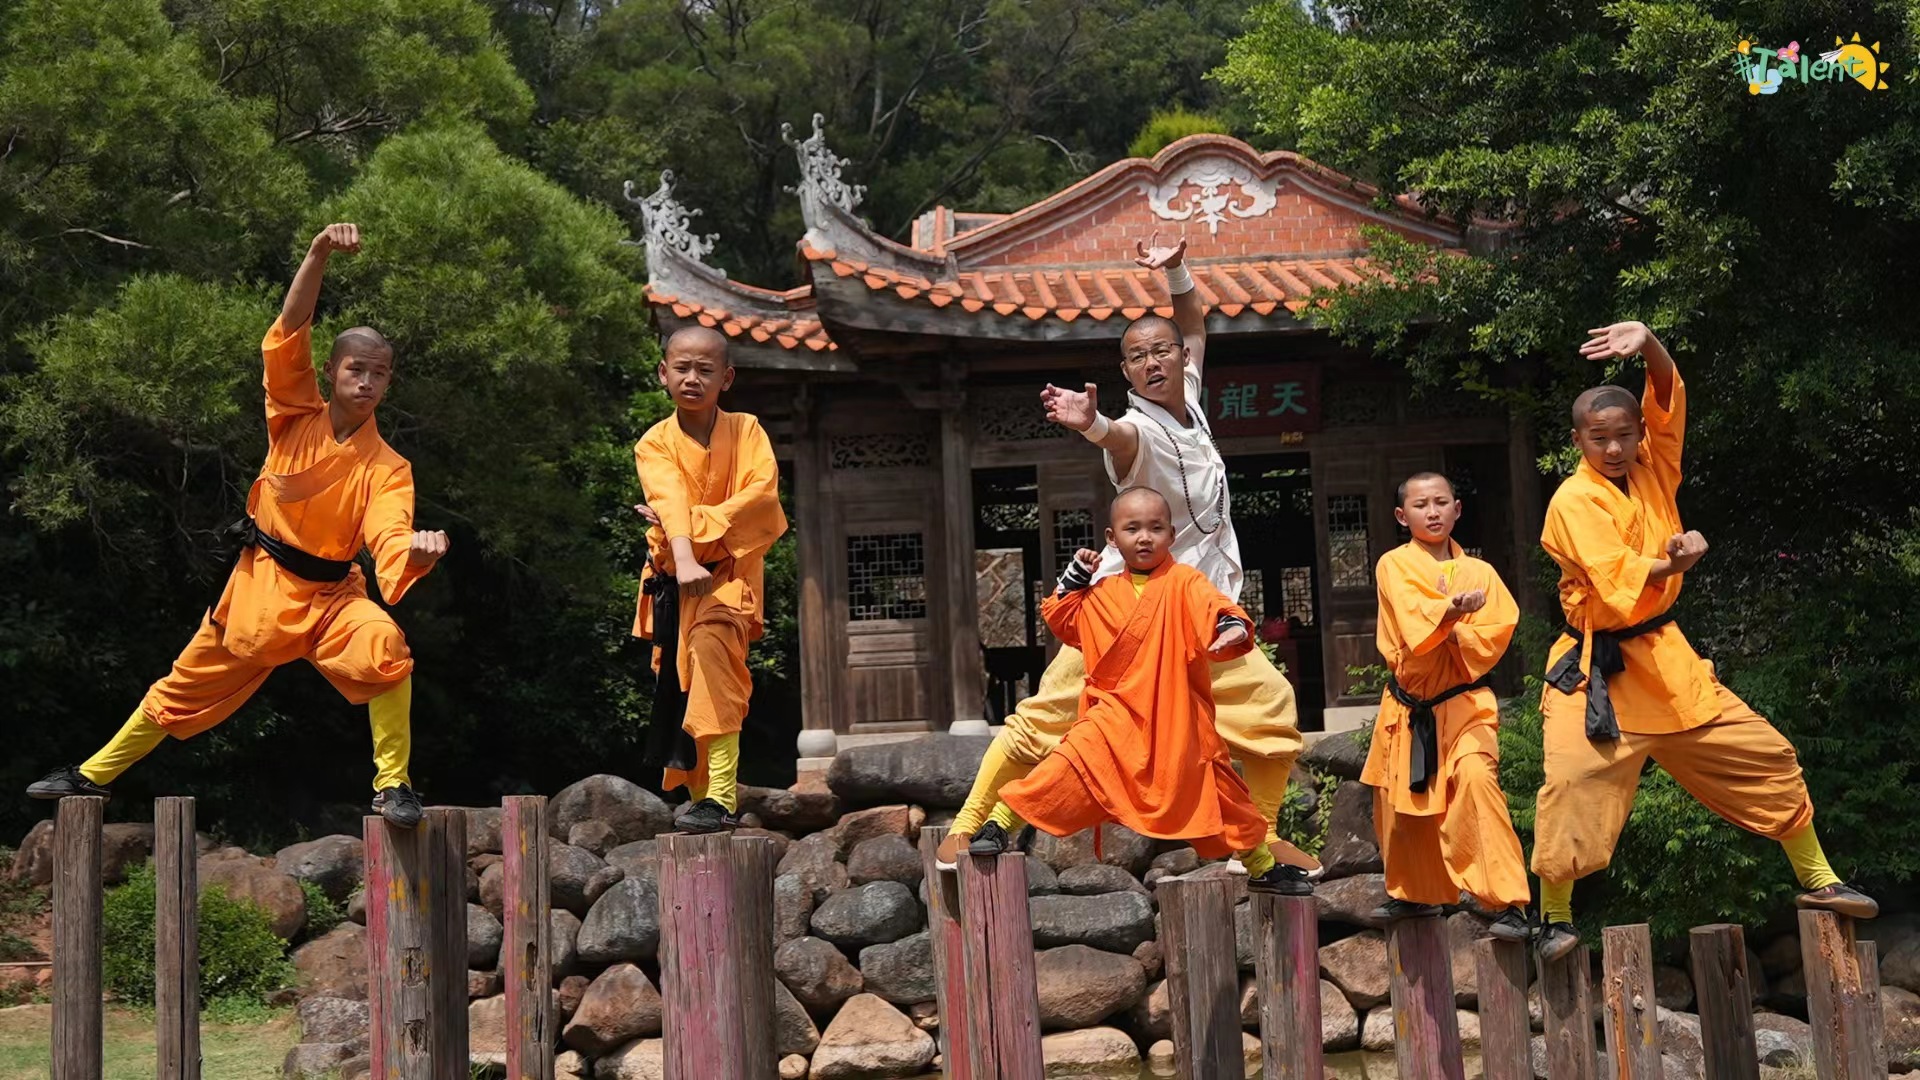 Kung fu pupils practice with their master on the wooden blocks at the Southern Shaolin Temple in Quanzhou.